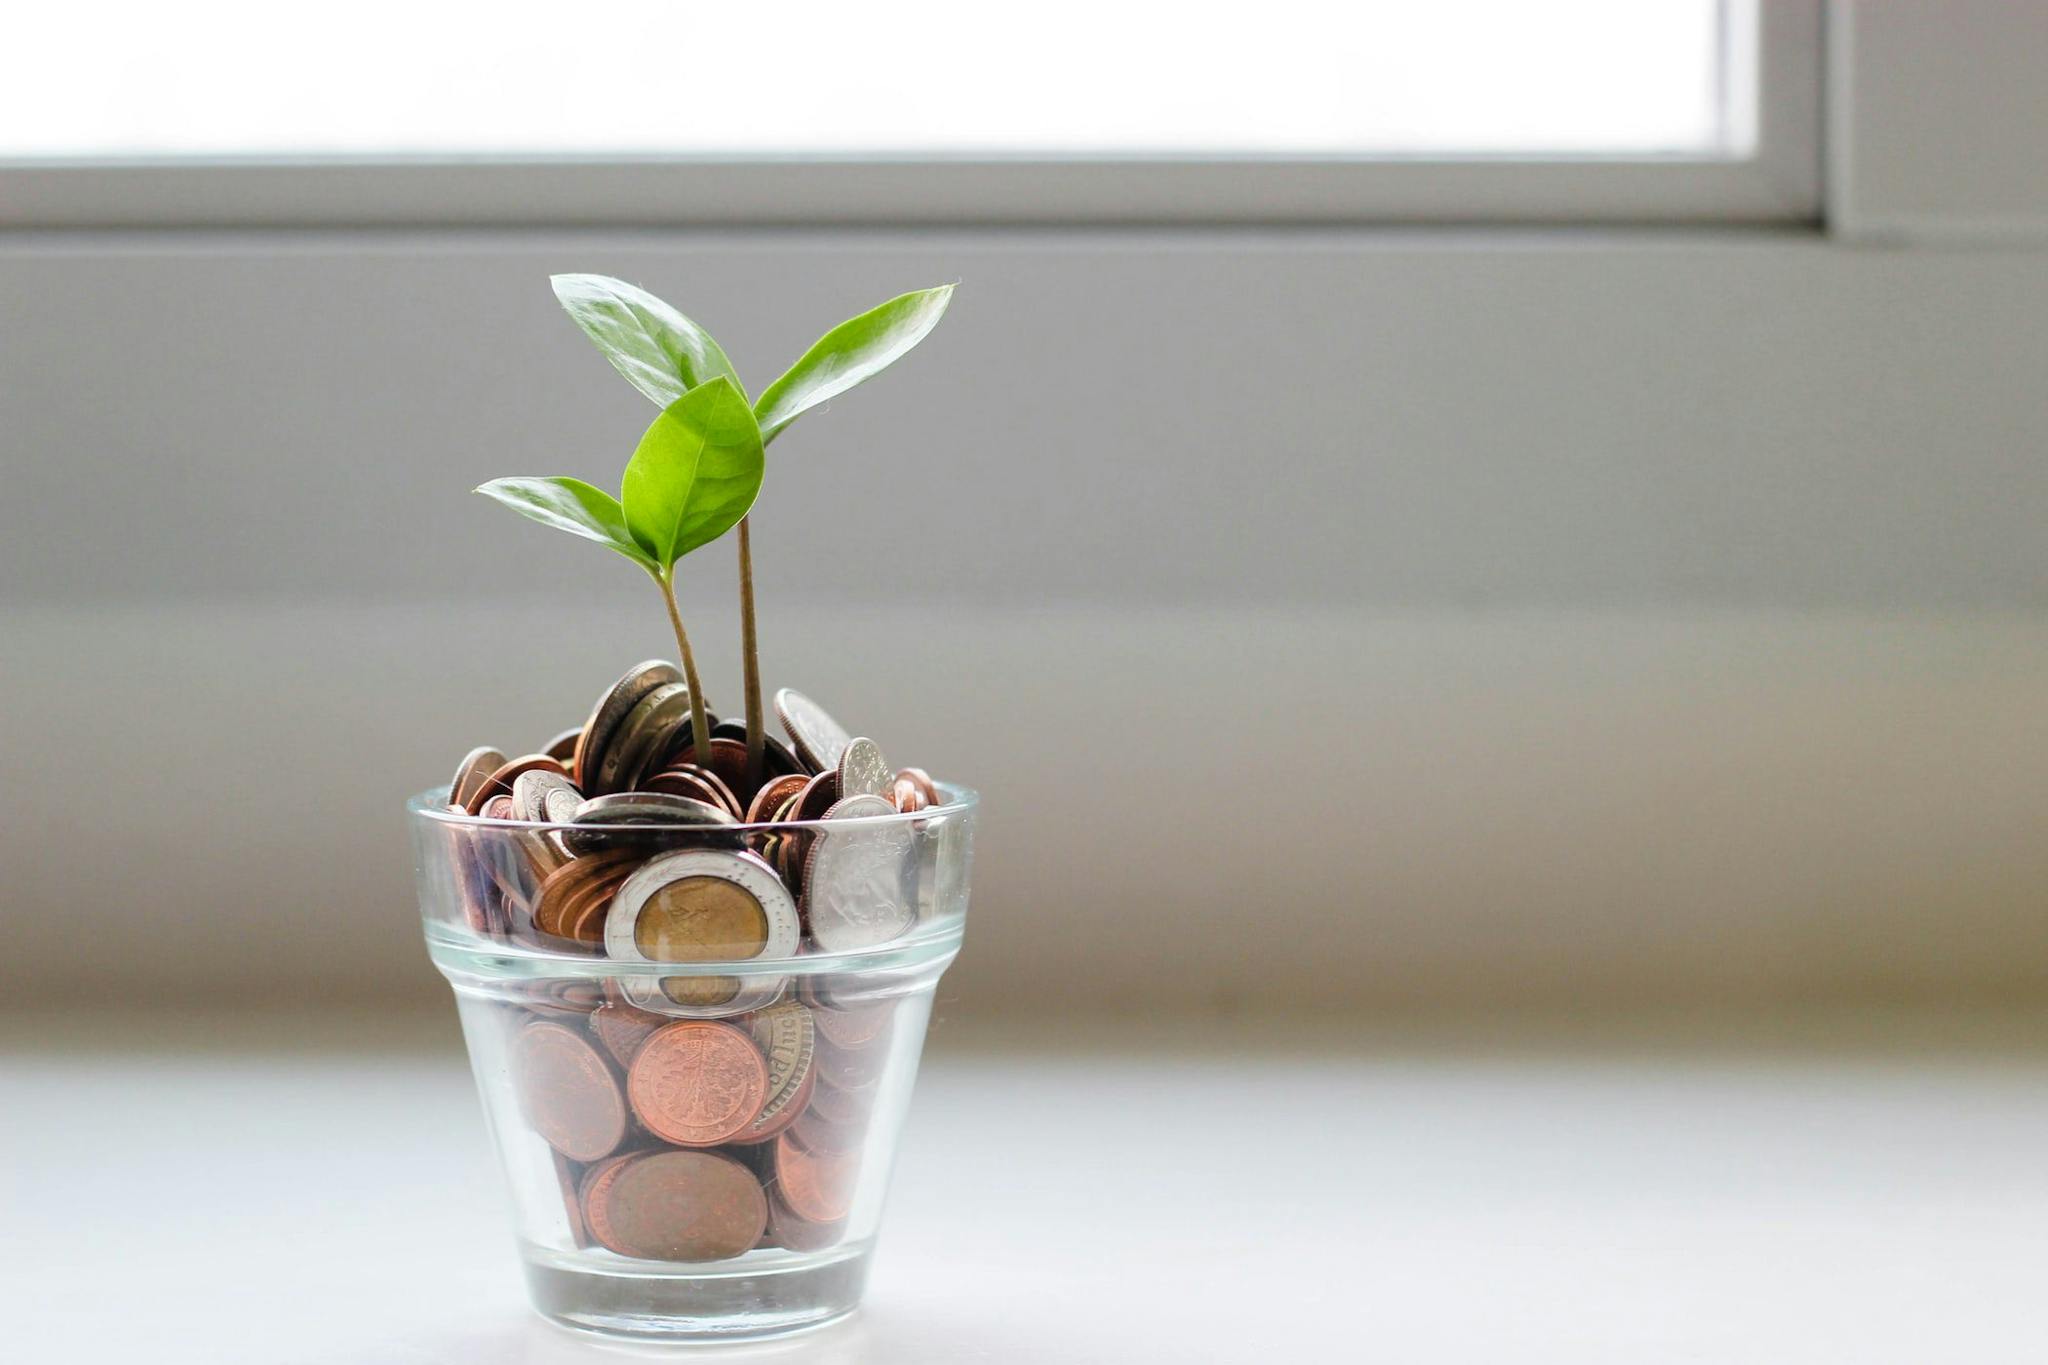 a plant growing from a glass cup of coins